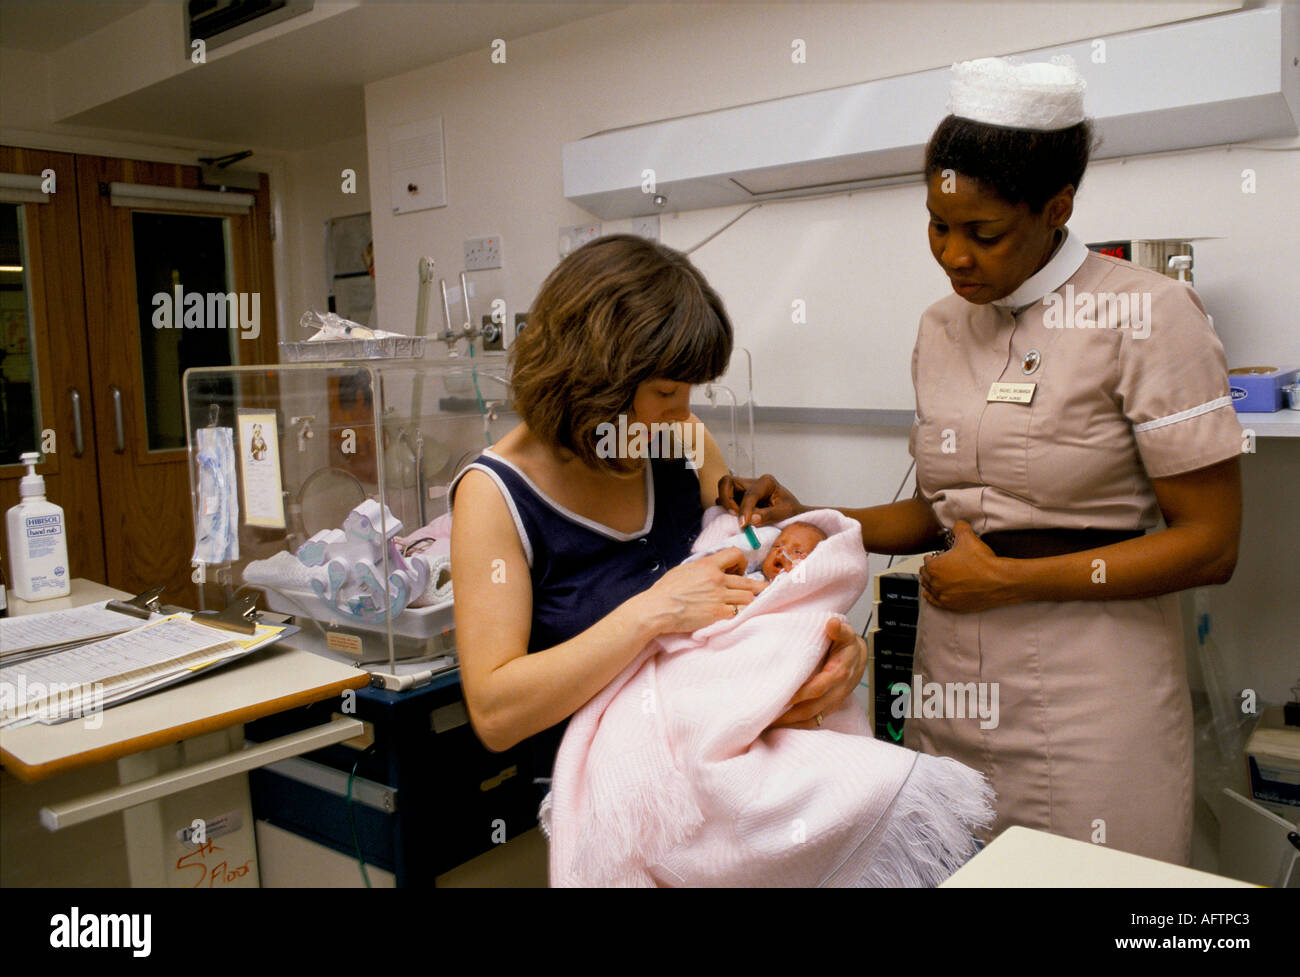 Young new mother with baby in incubator Portland Hospital, a private hospital in London  England 1990s.  1994 HOMER SYKES Stock Photo